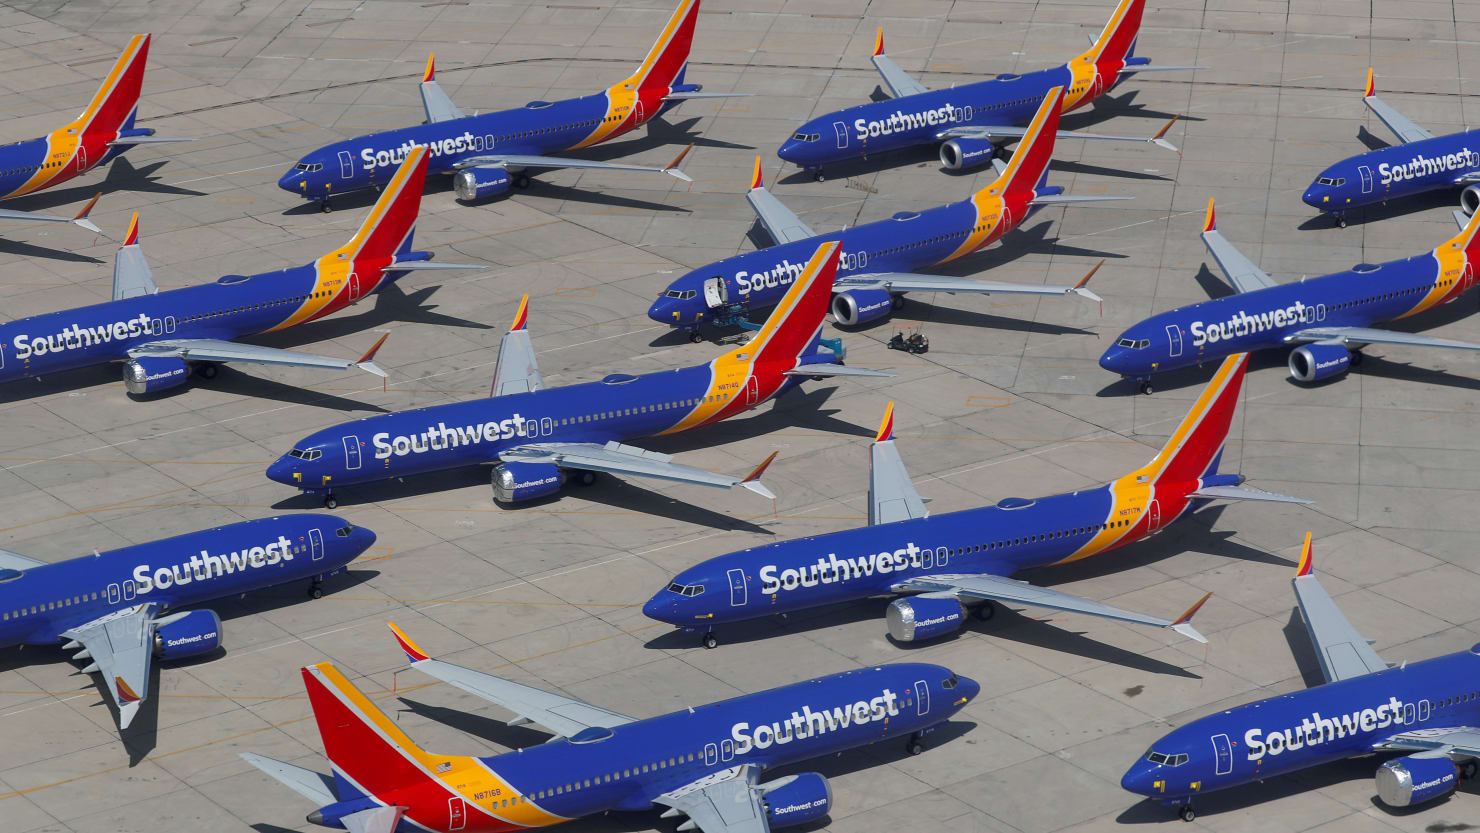 Southwest Airlines would have made turns, pilots struggled to get planes to take off